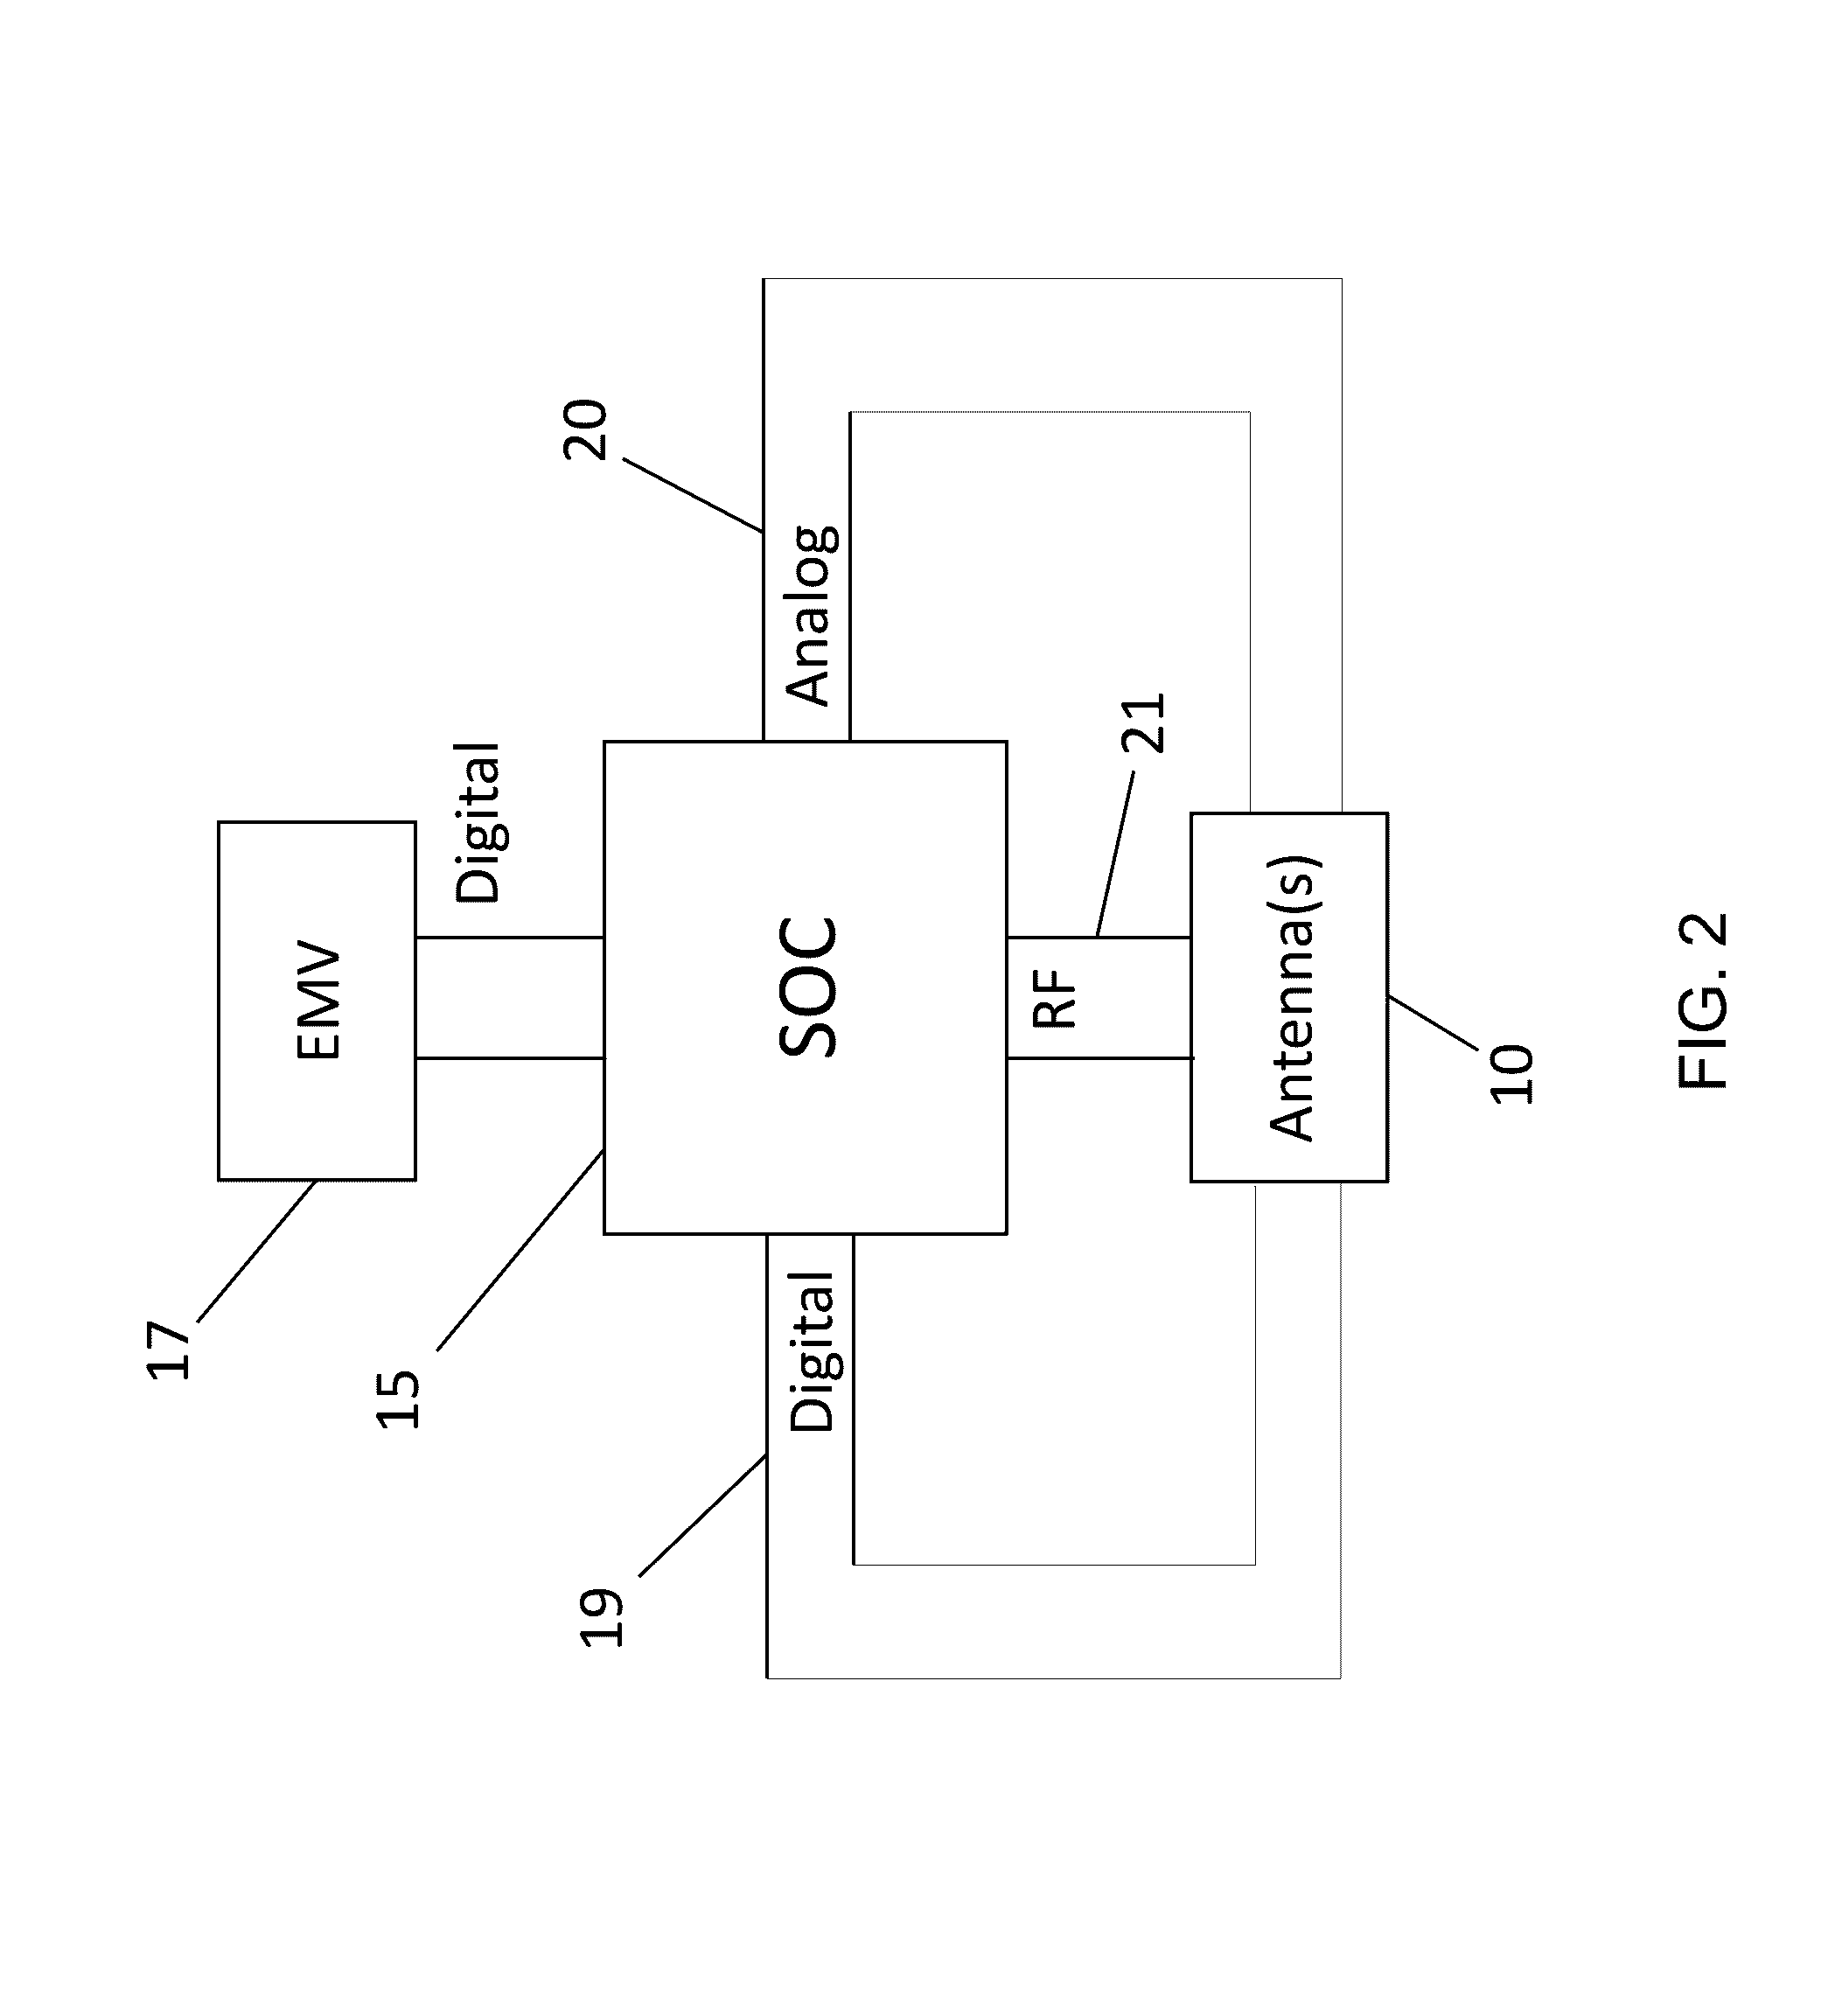 System and Method for Low-Power Close-Proximity Communications and Energy Transfer Using a Miniture Multi-Purpose Antenna